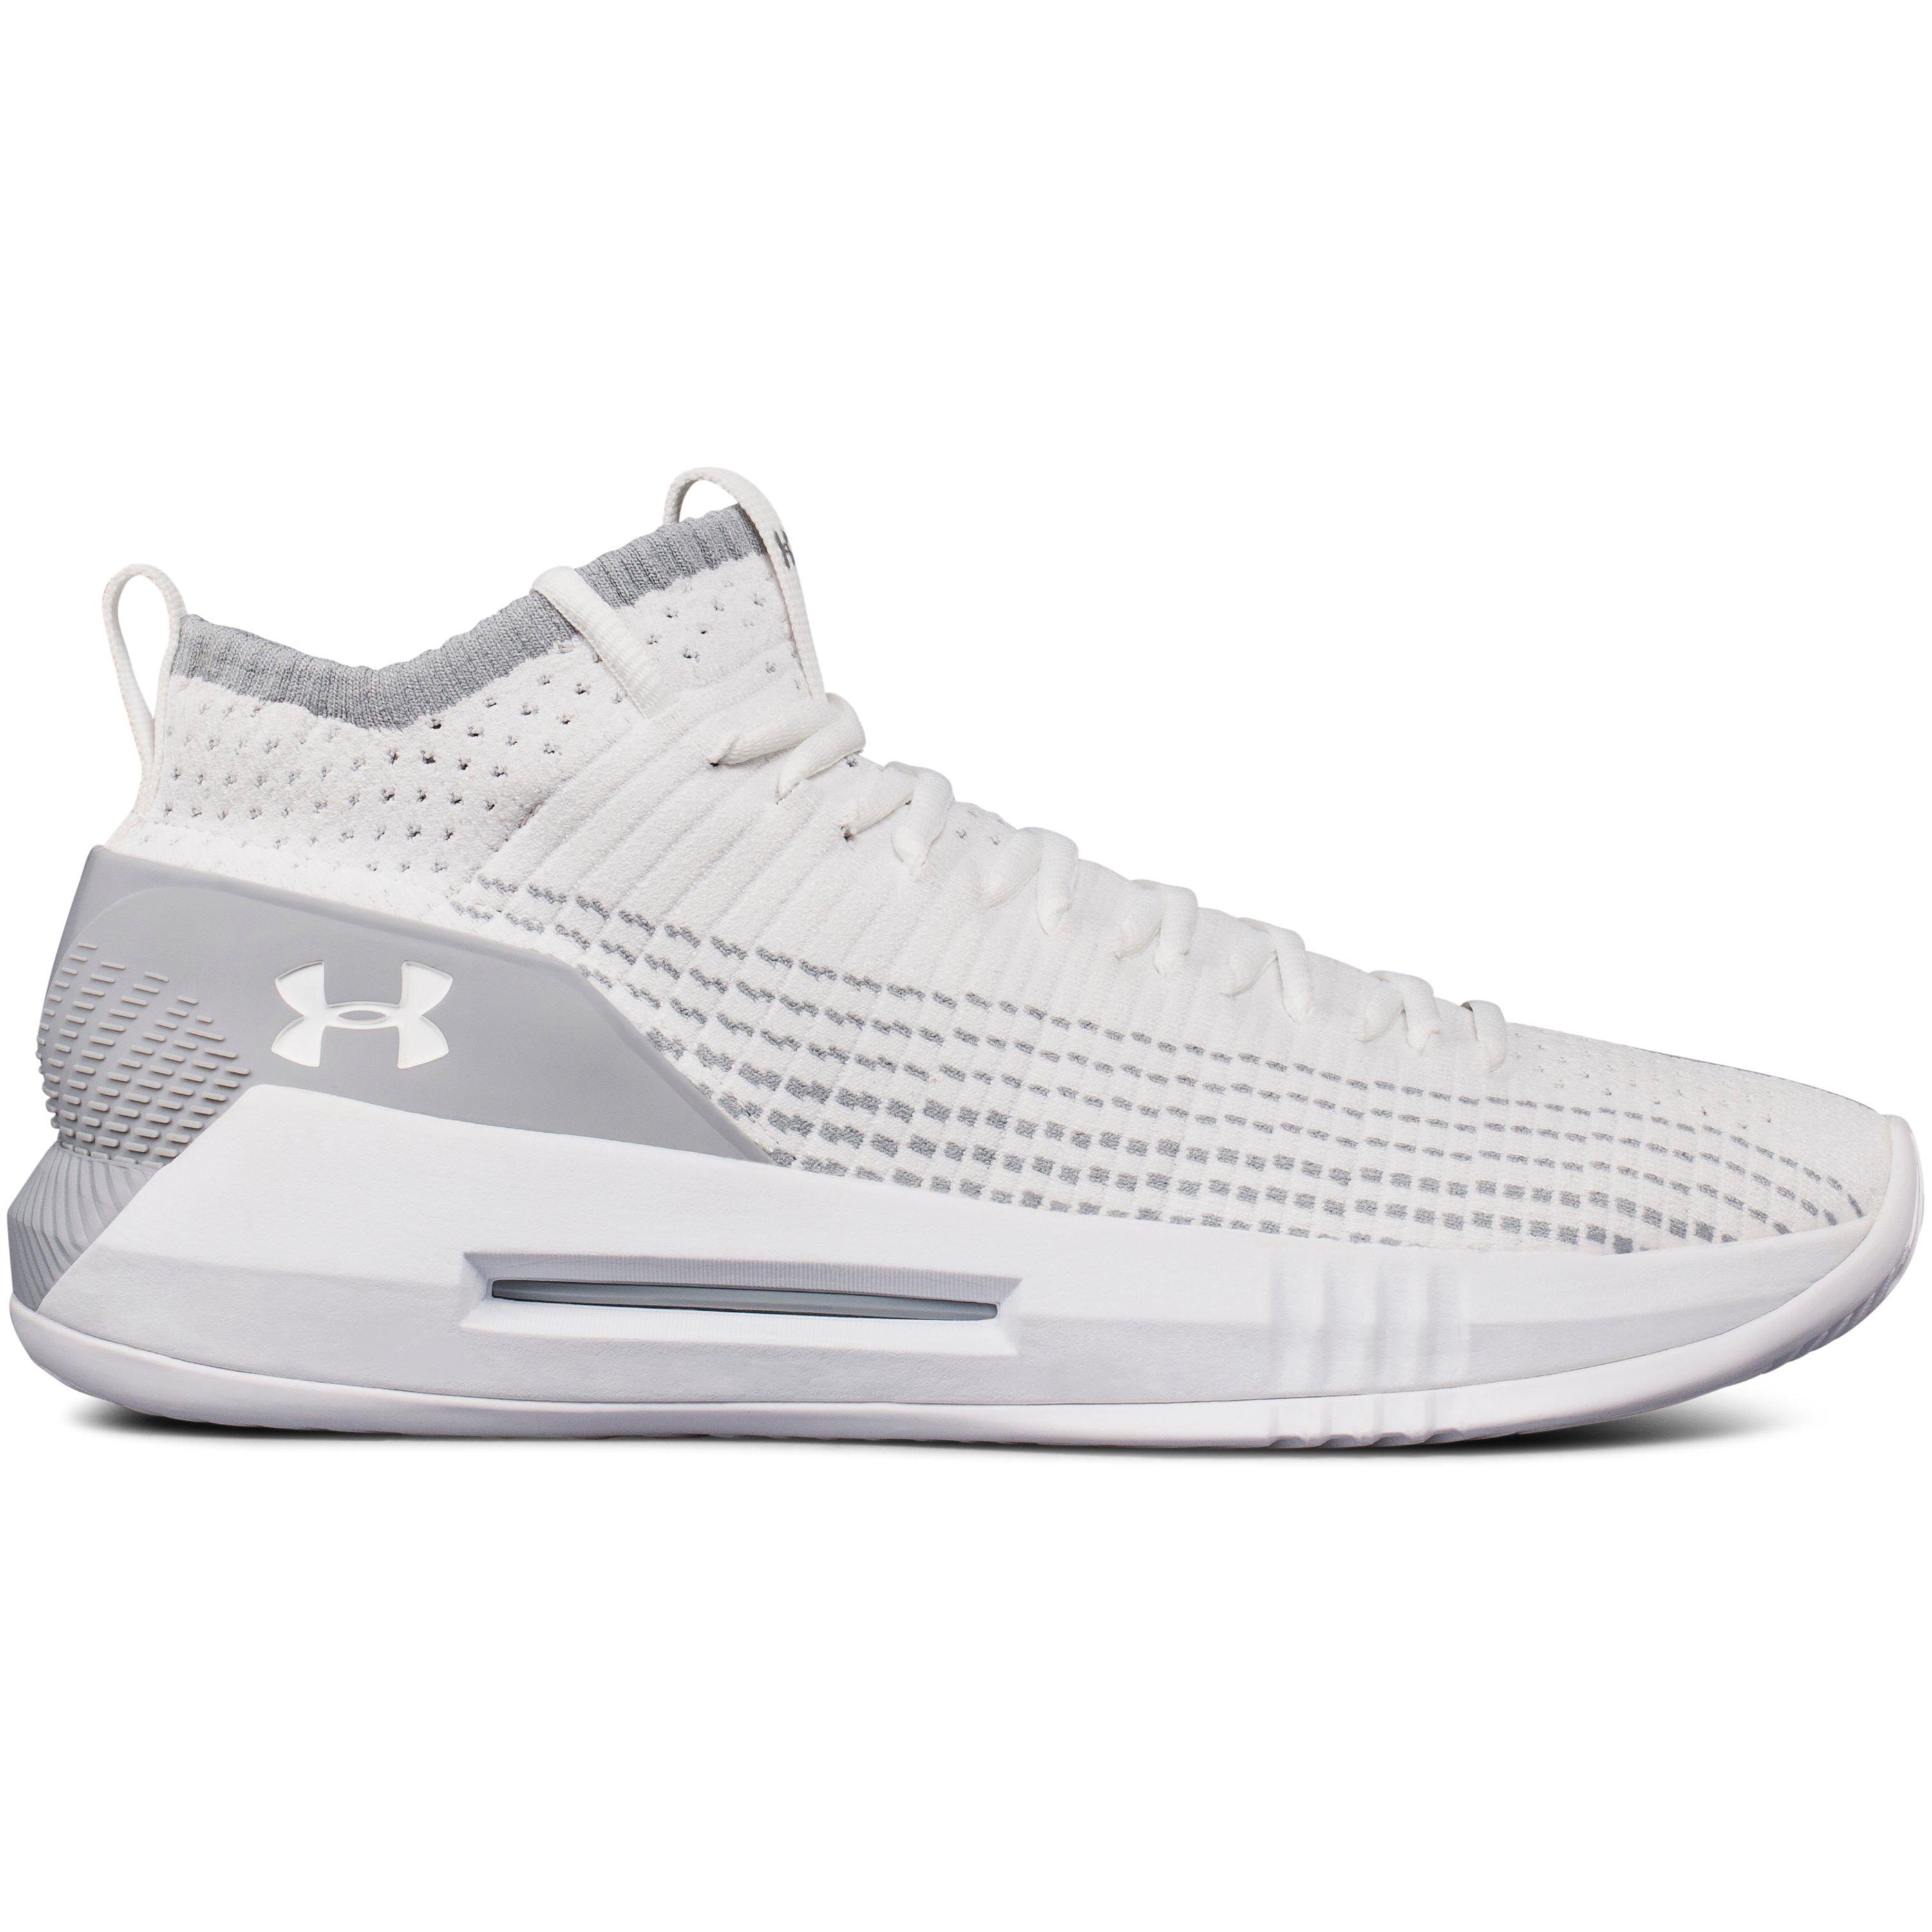 Under Armour UA Mens Heat Seeker Lace Up Basketball Training Sneakers Shoes 